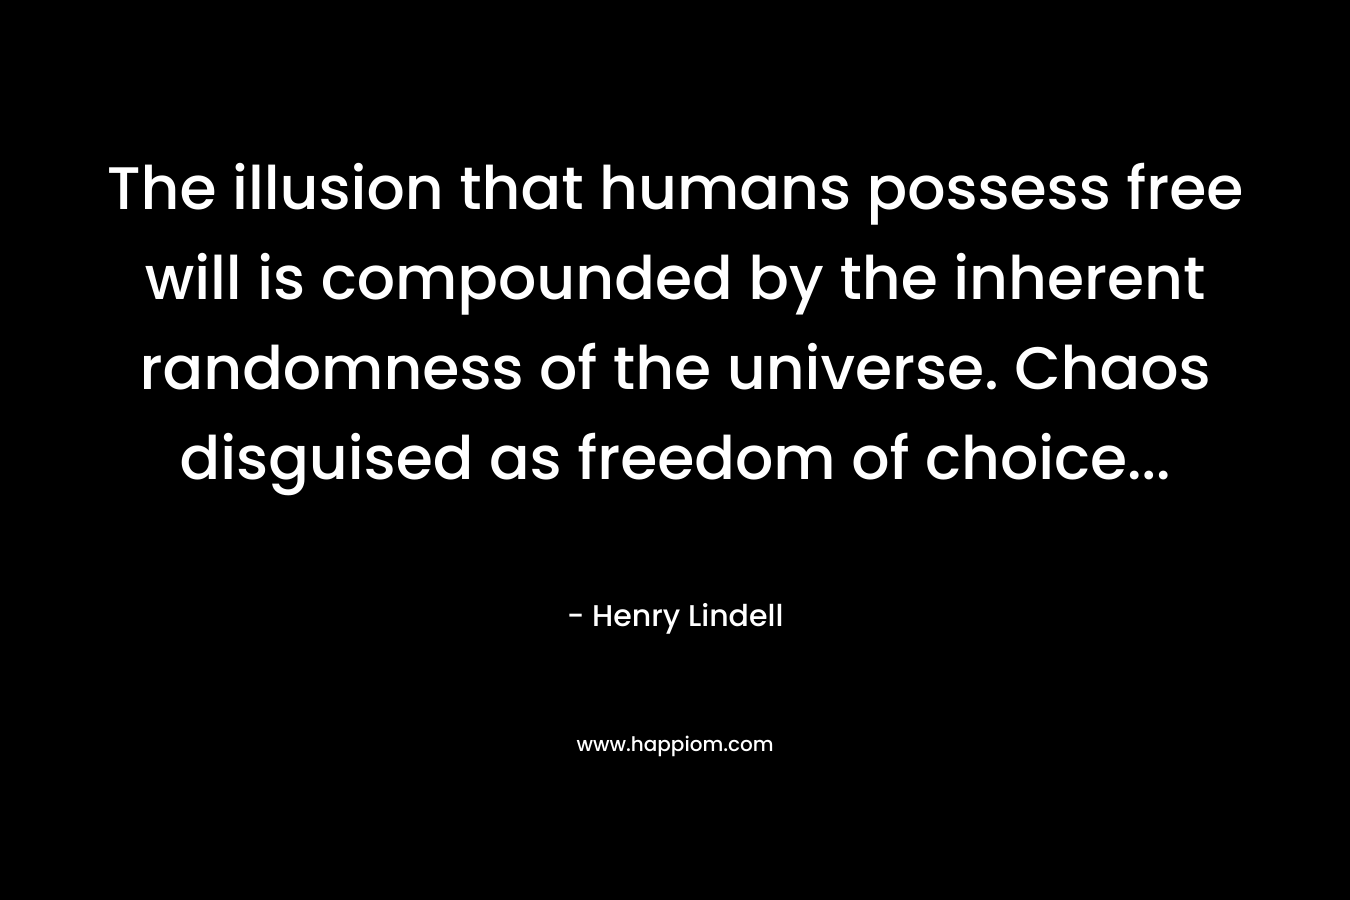 The illusion that humans possess free will is compounded by the inherent randomness of the universe. Chaos disguised as freedom of choice...